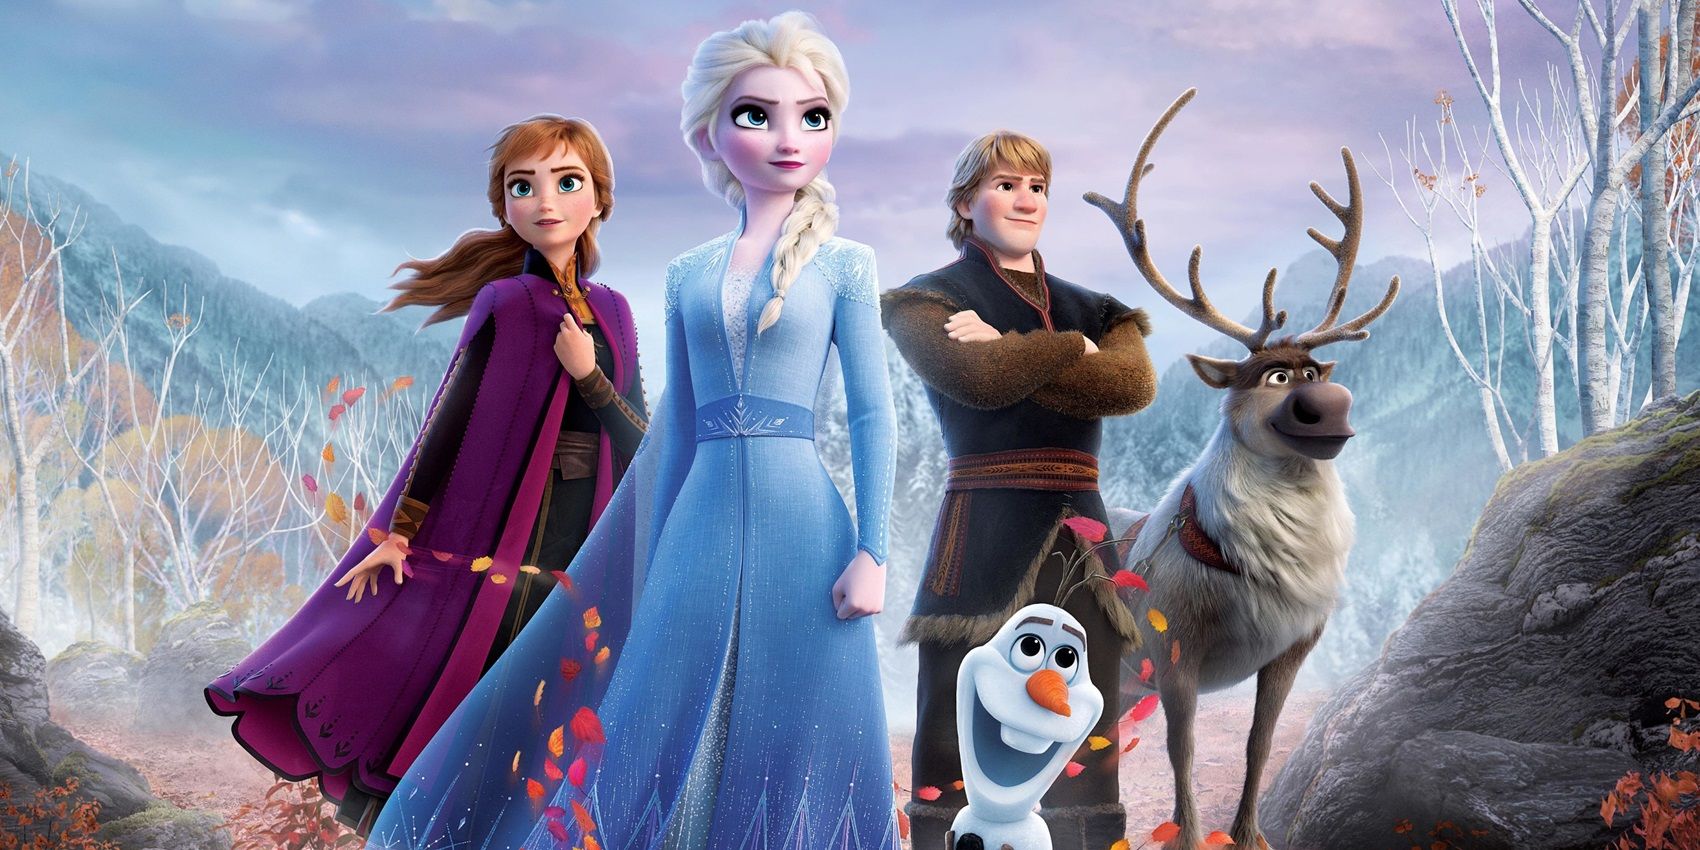 Frozen 3: Development confirmed! cast members to reprise their roles